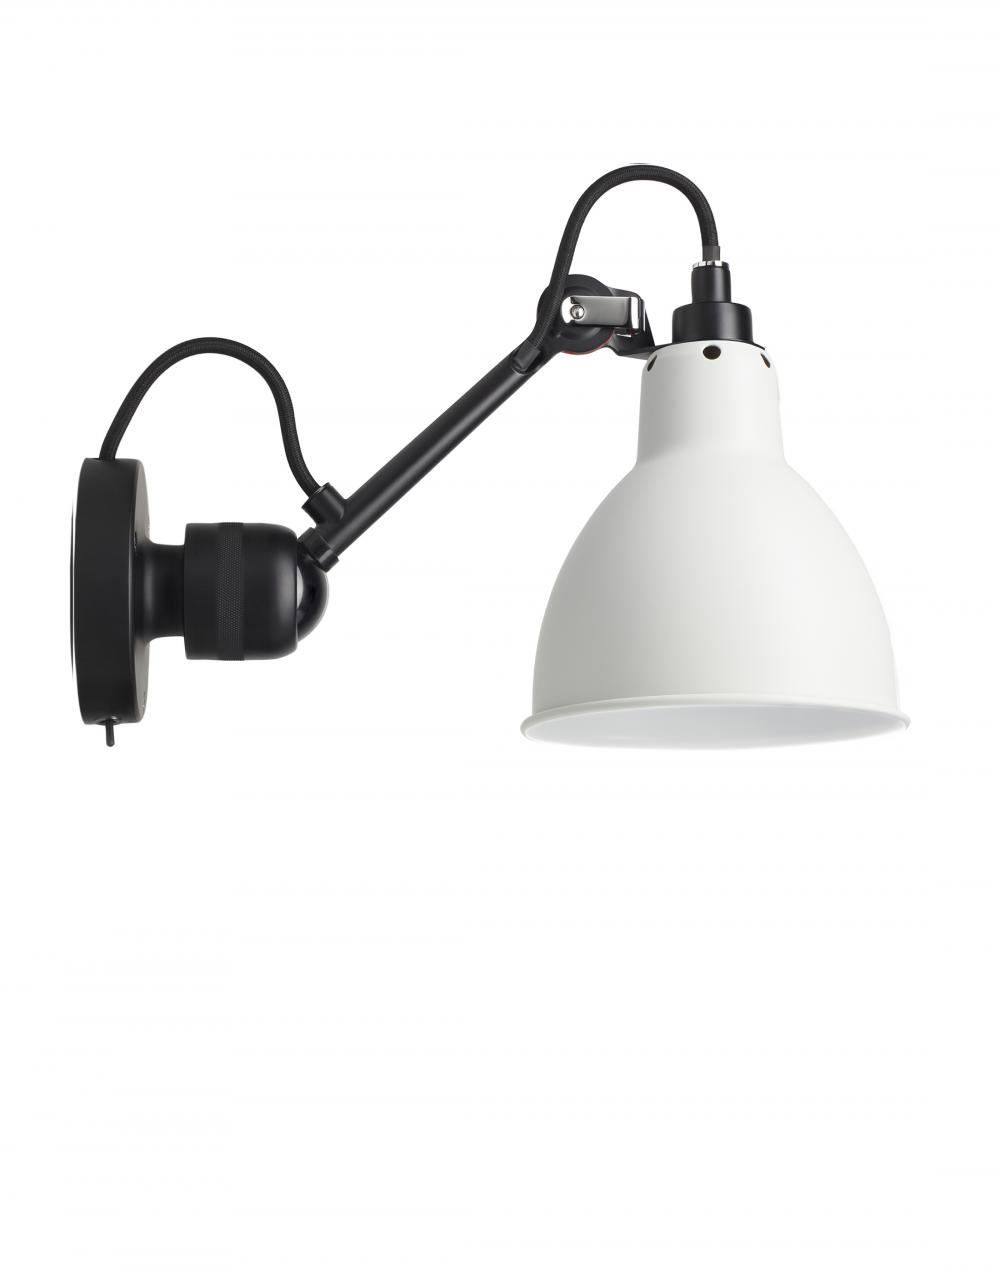 Lampe Gras 304 Small Wall Light Black Arm White Shade Round Integral Switch